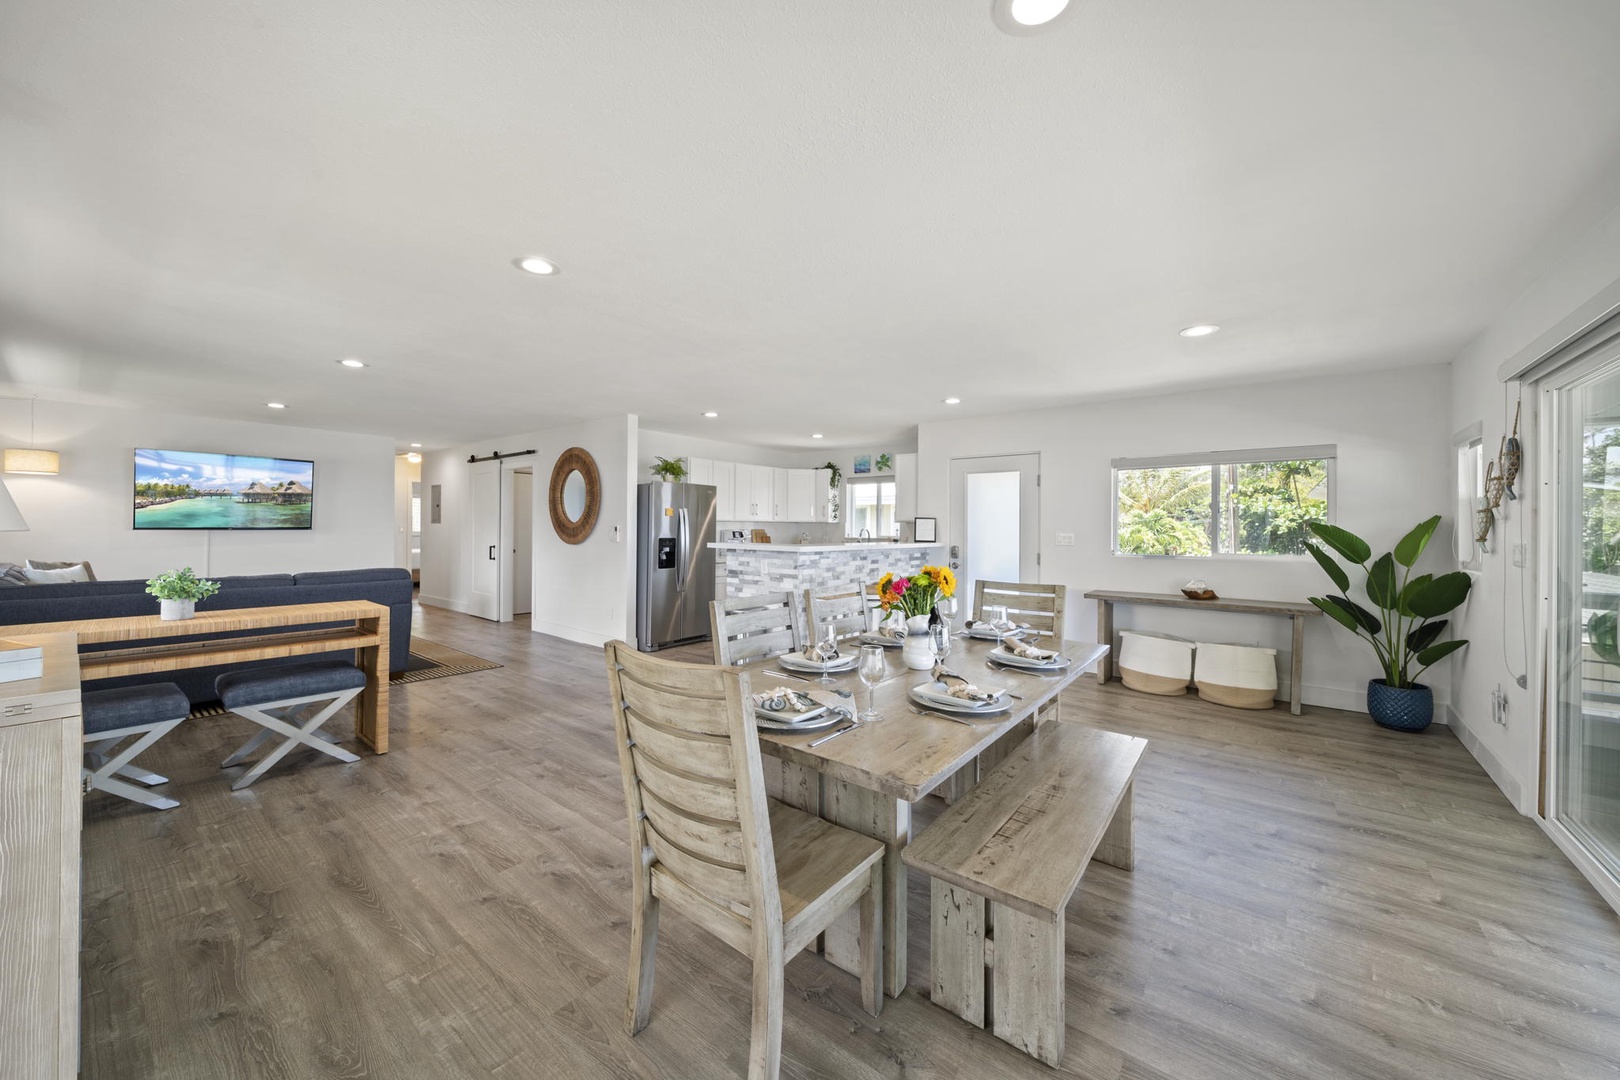 Haleiwa Vacation Rentals, Hale Nalu - The formal dining area opens up to the living area and kitchen